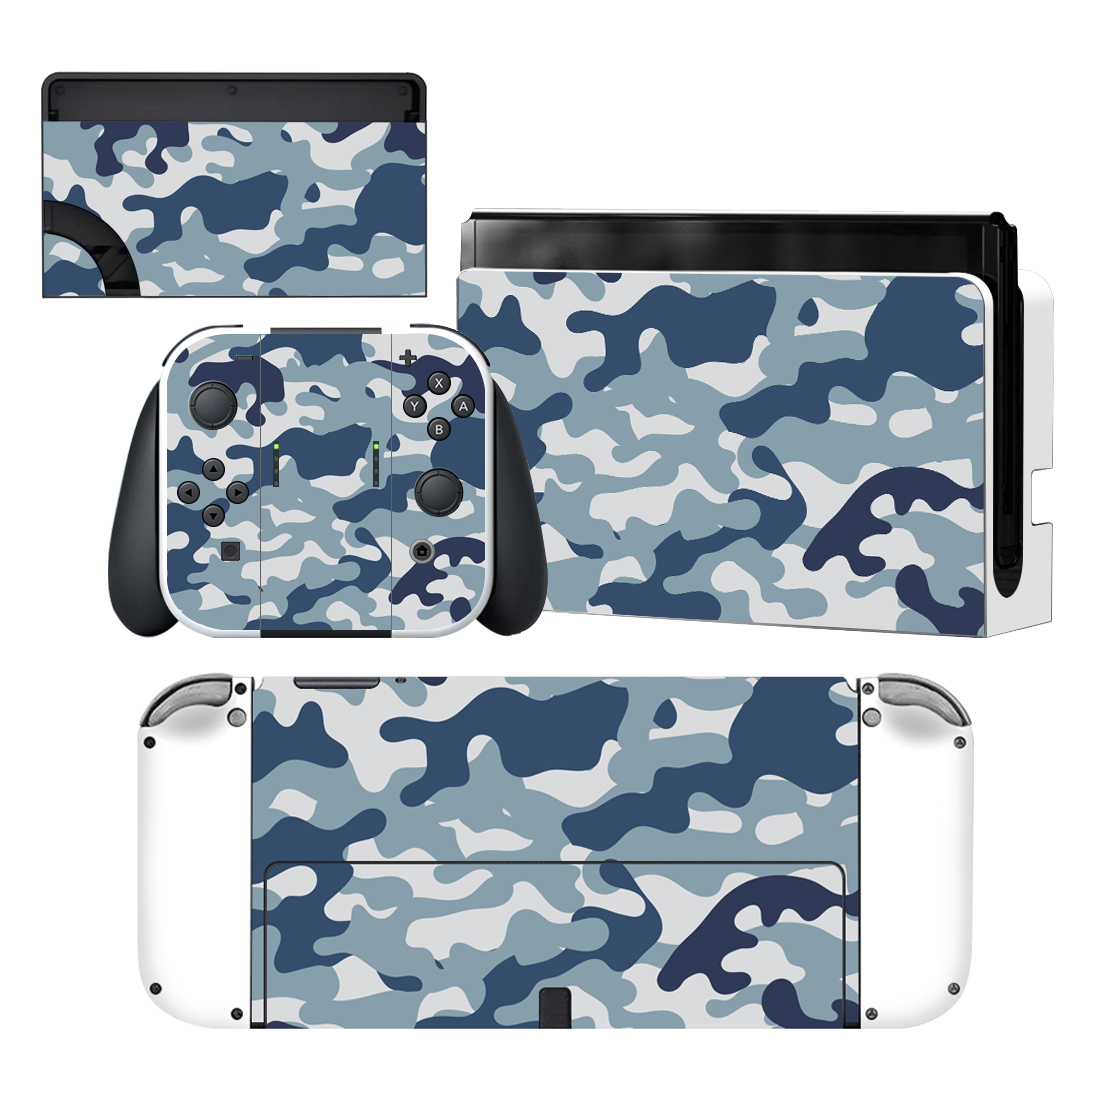 Blue And White Camouflage Nintendo Switch OLED Skin Sticker Decal